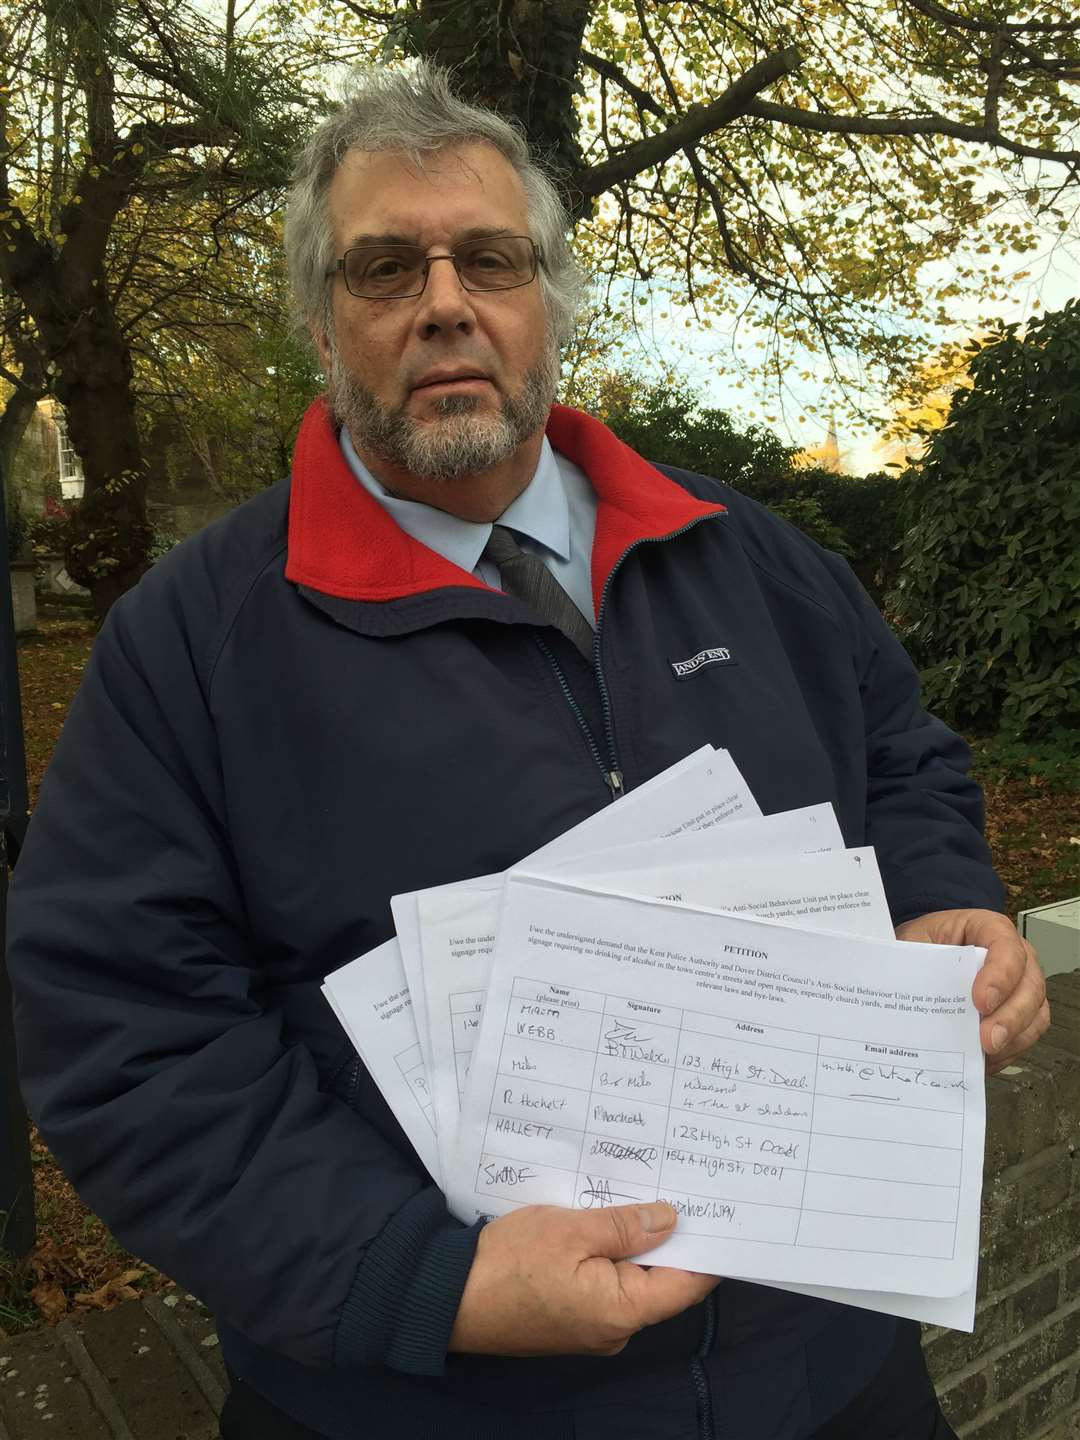 Cllr Mike Eddy with a copy of the petition